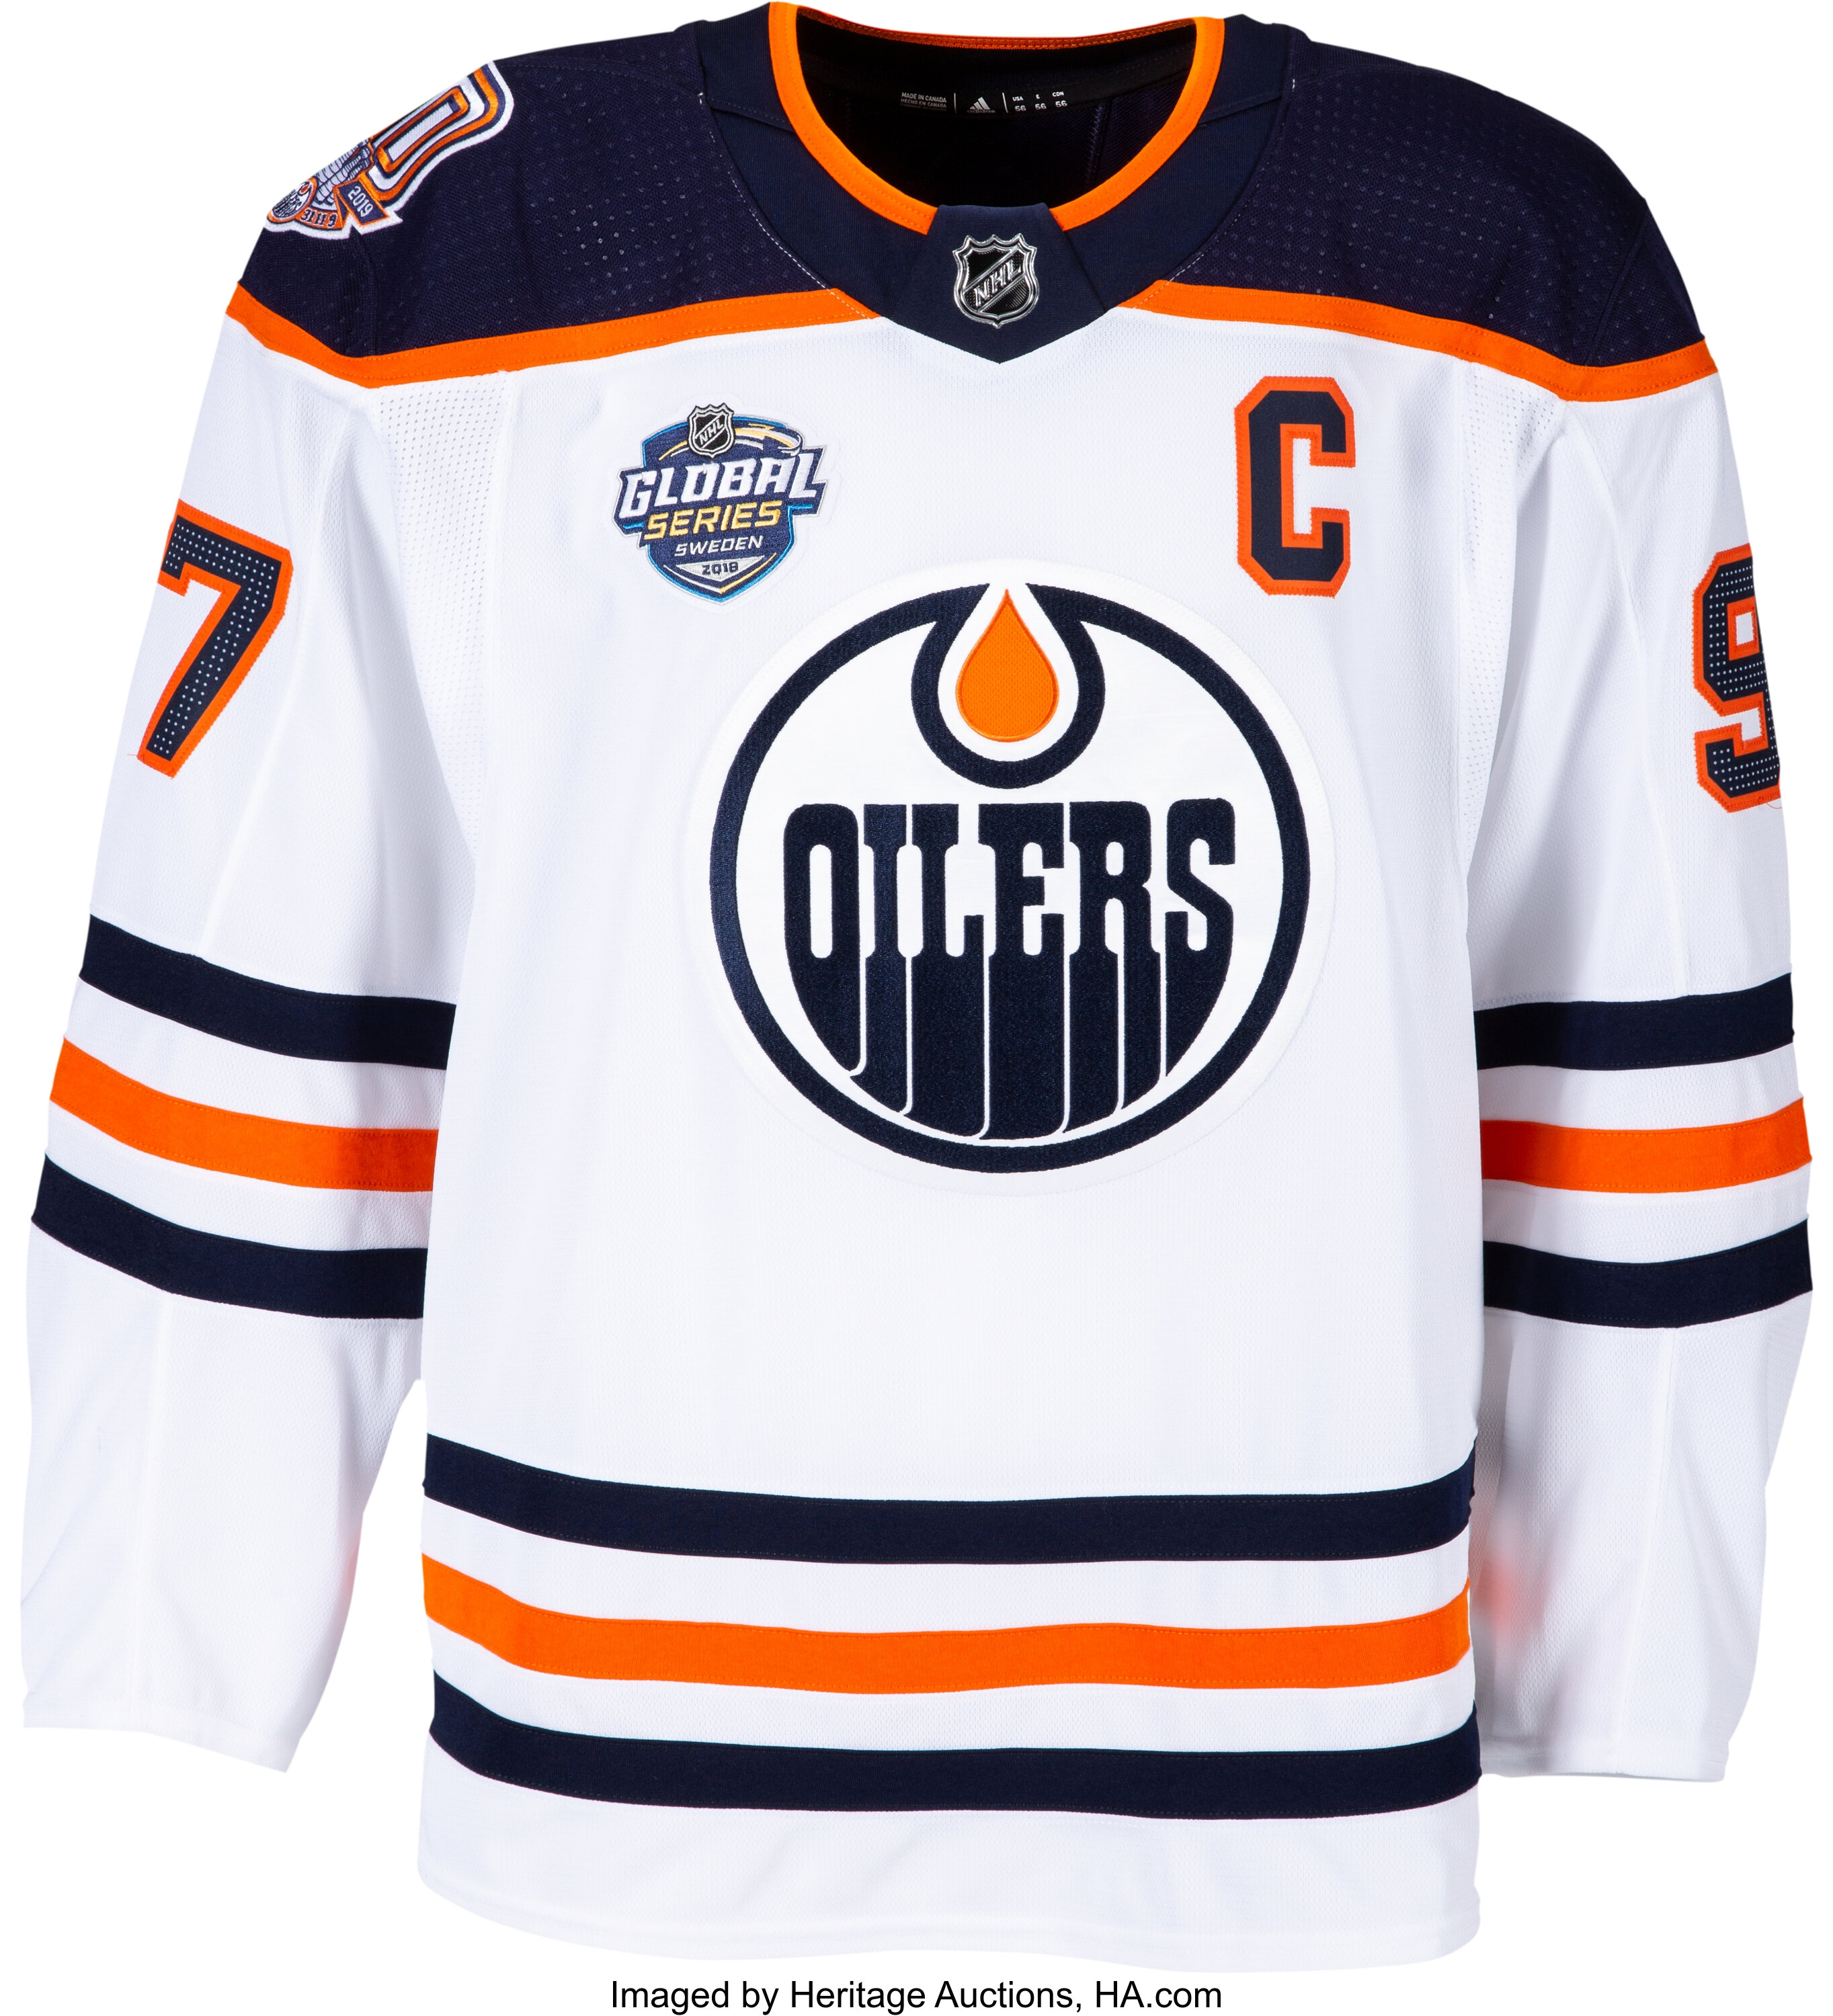 Connor McDavid 2018 All-Star adidas jersey with proper shoulder patches.  Size 52 - Imgur